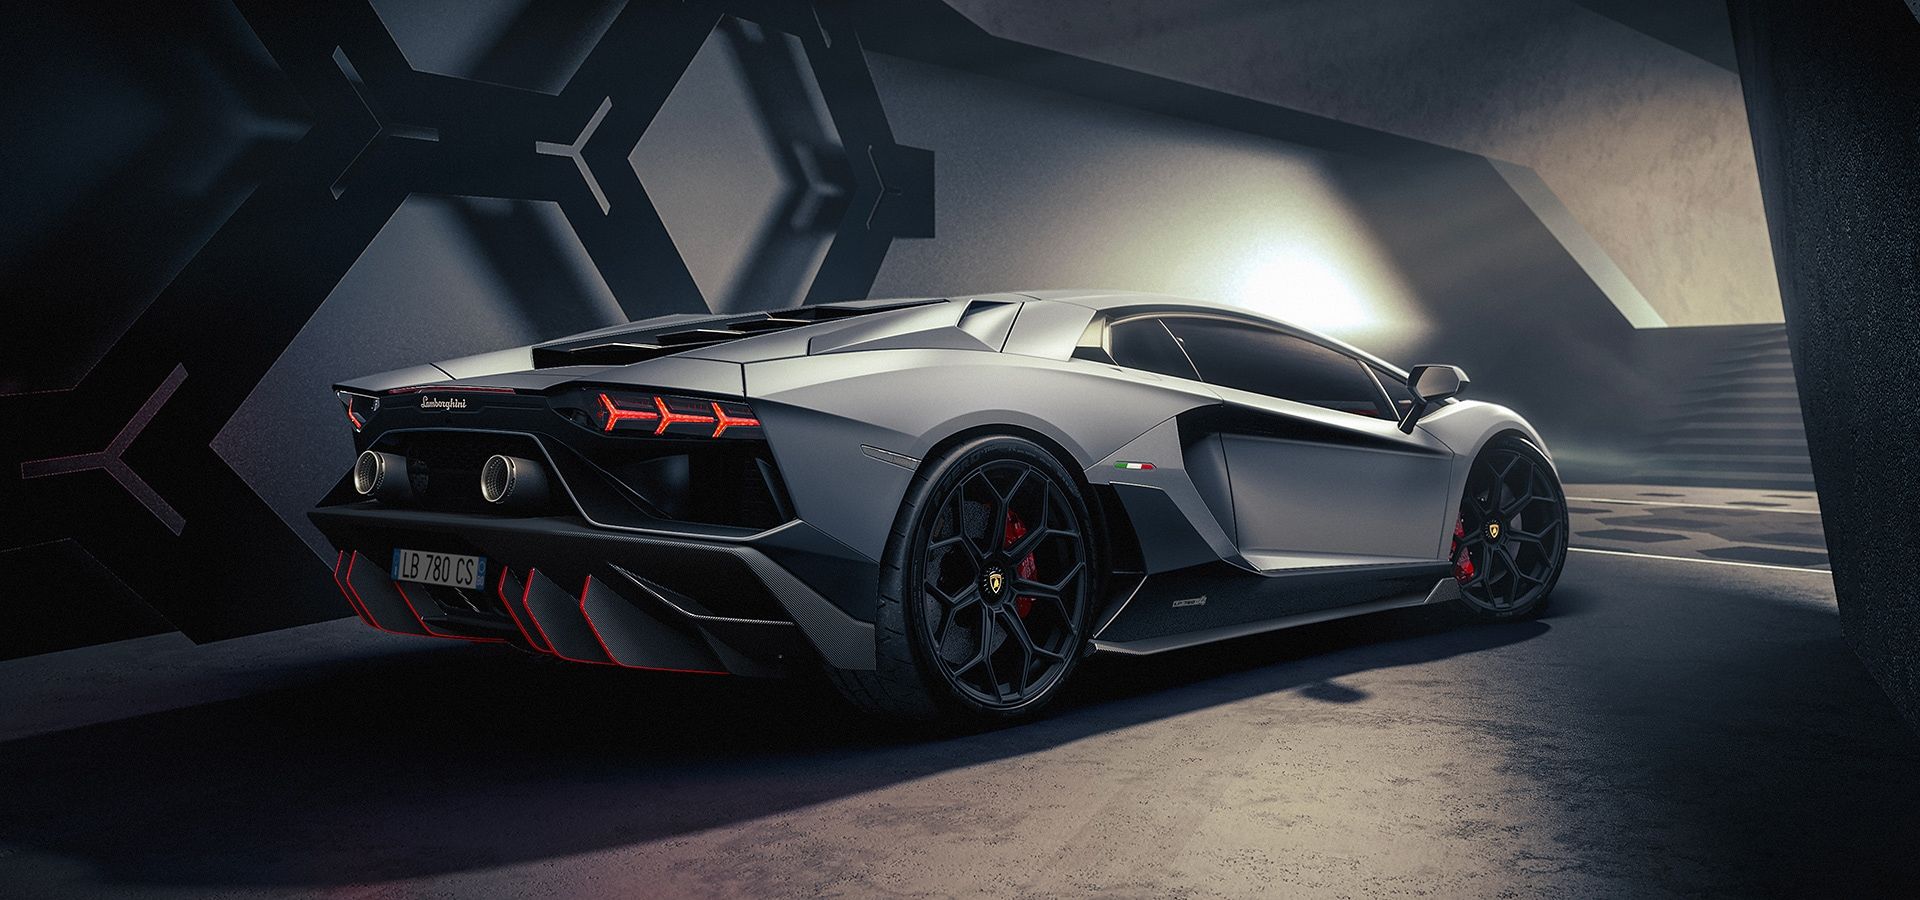 This will help the car to produce a maximum power output of 769bhp and 720Nm of torque (Image: Lamborghini) 